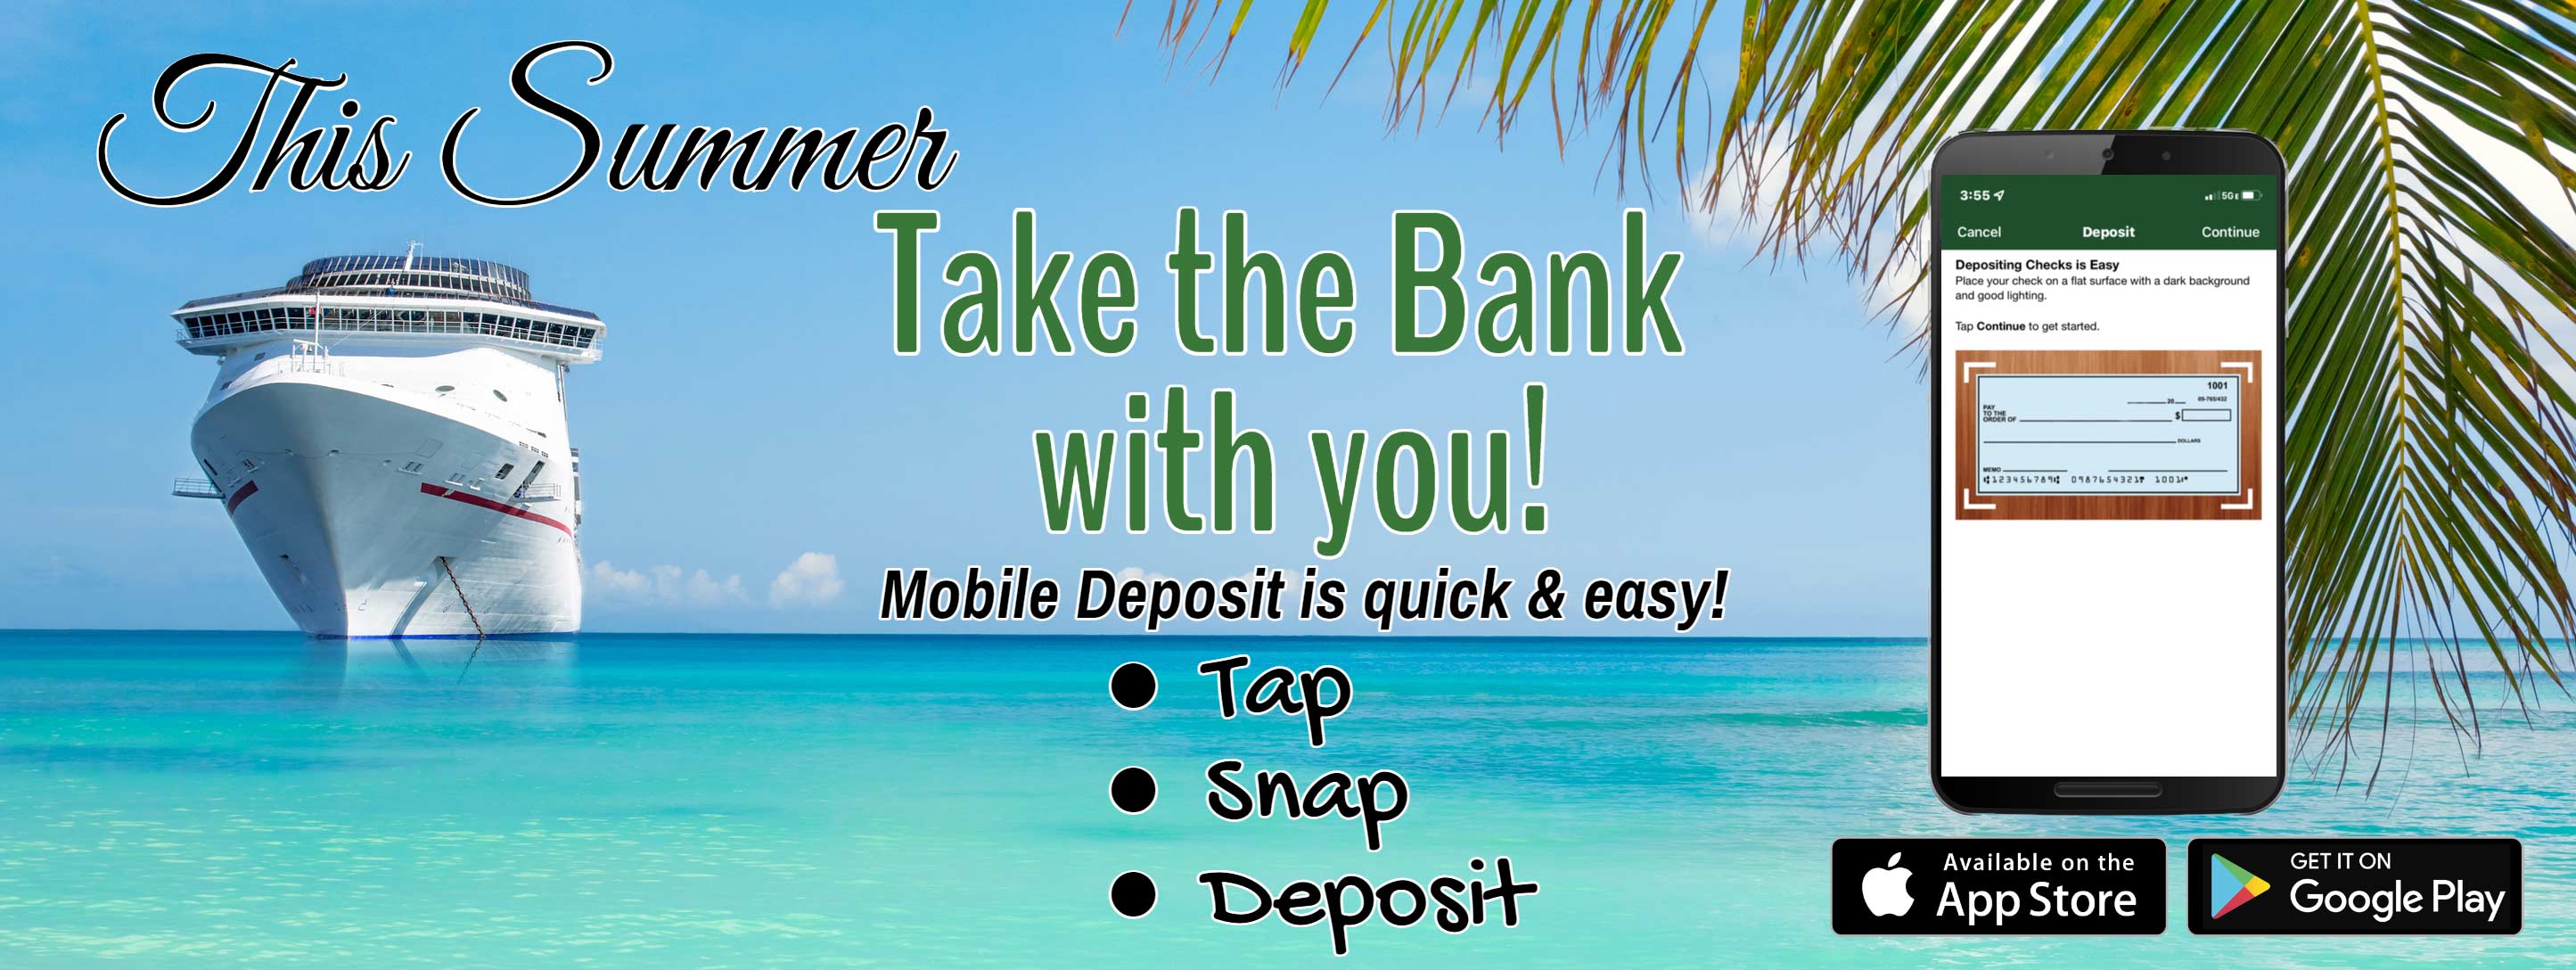 This Summer take the bank with you! Mobile Deposit is quick and easy! Tap, Snap, Deposit.